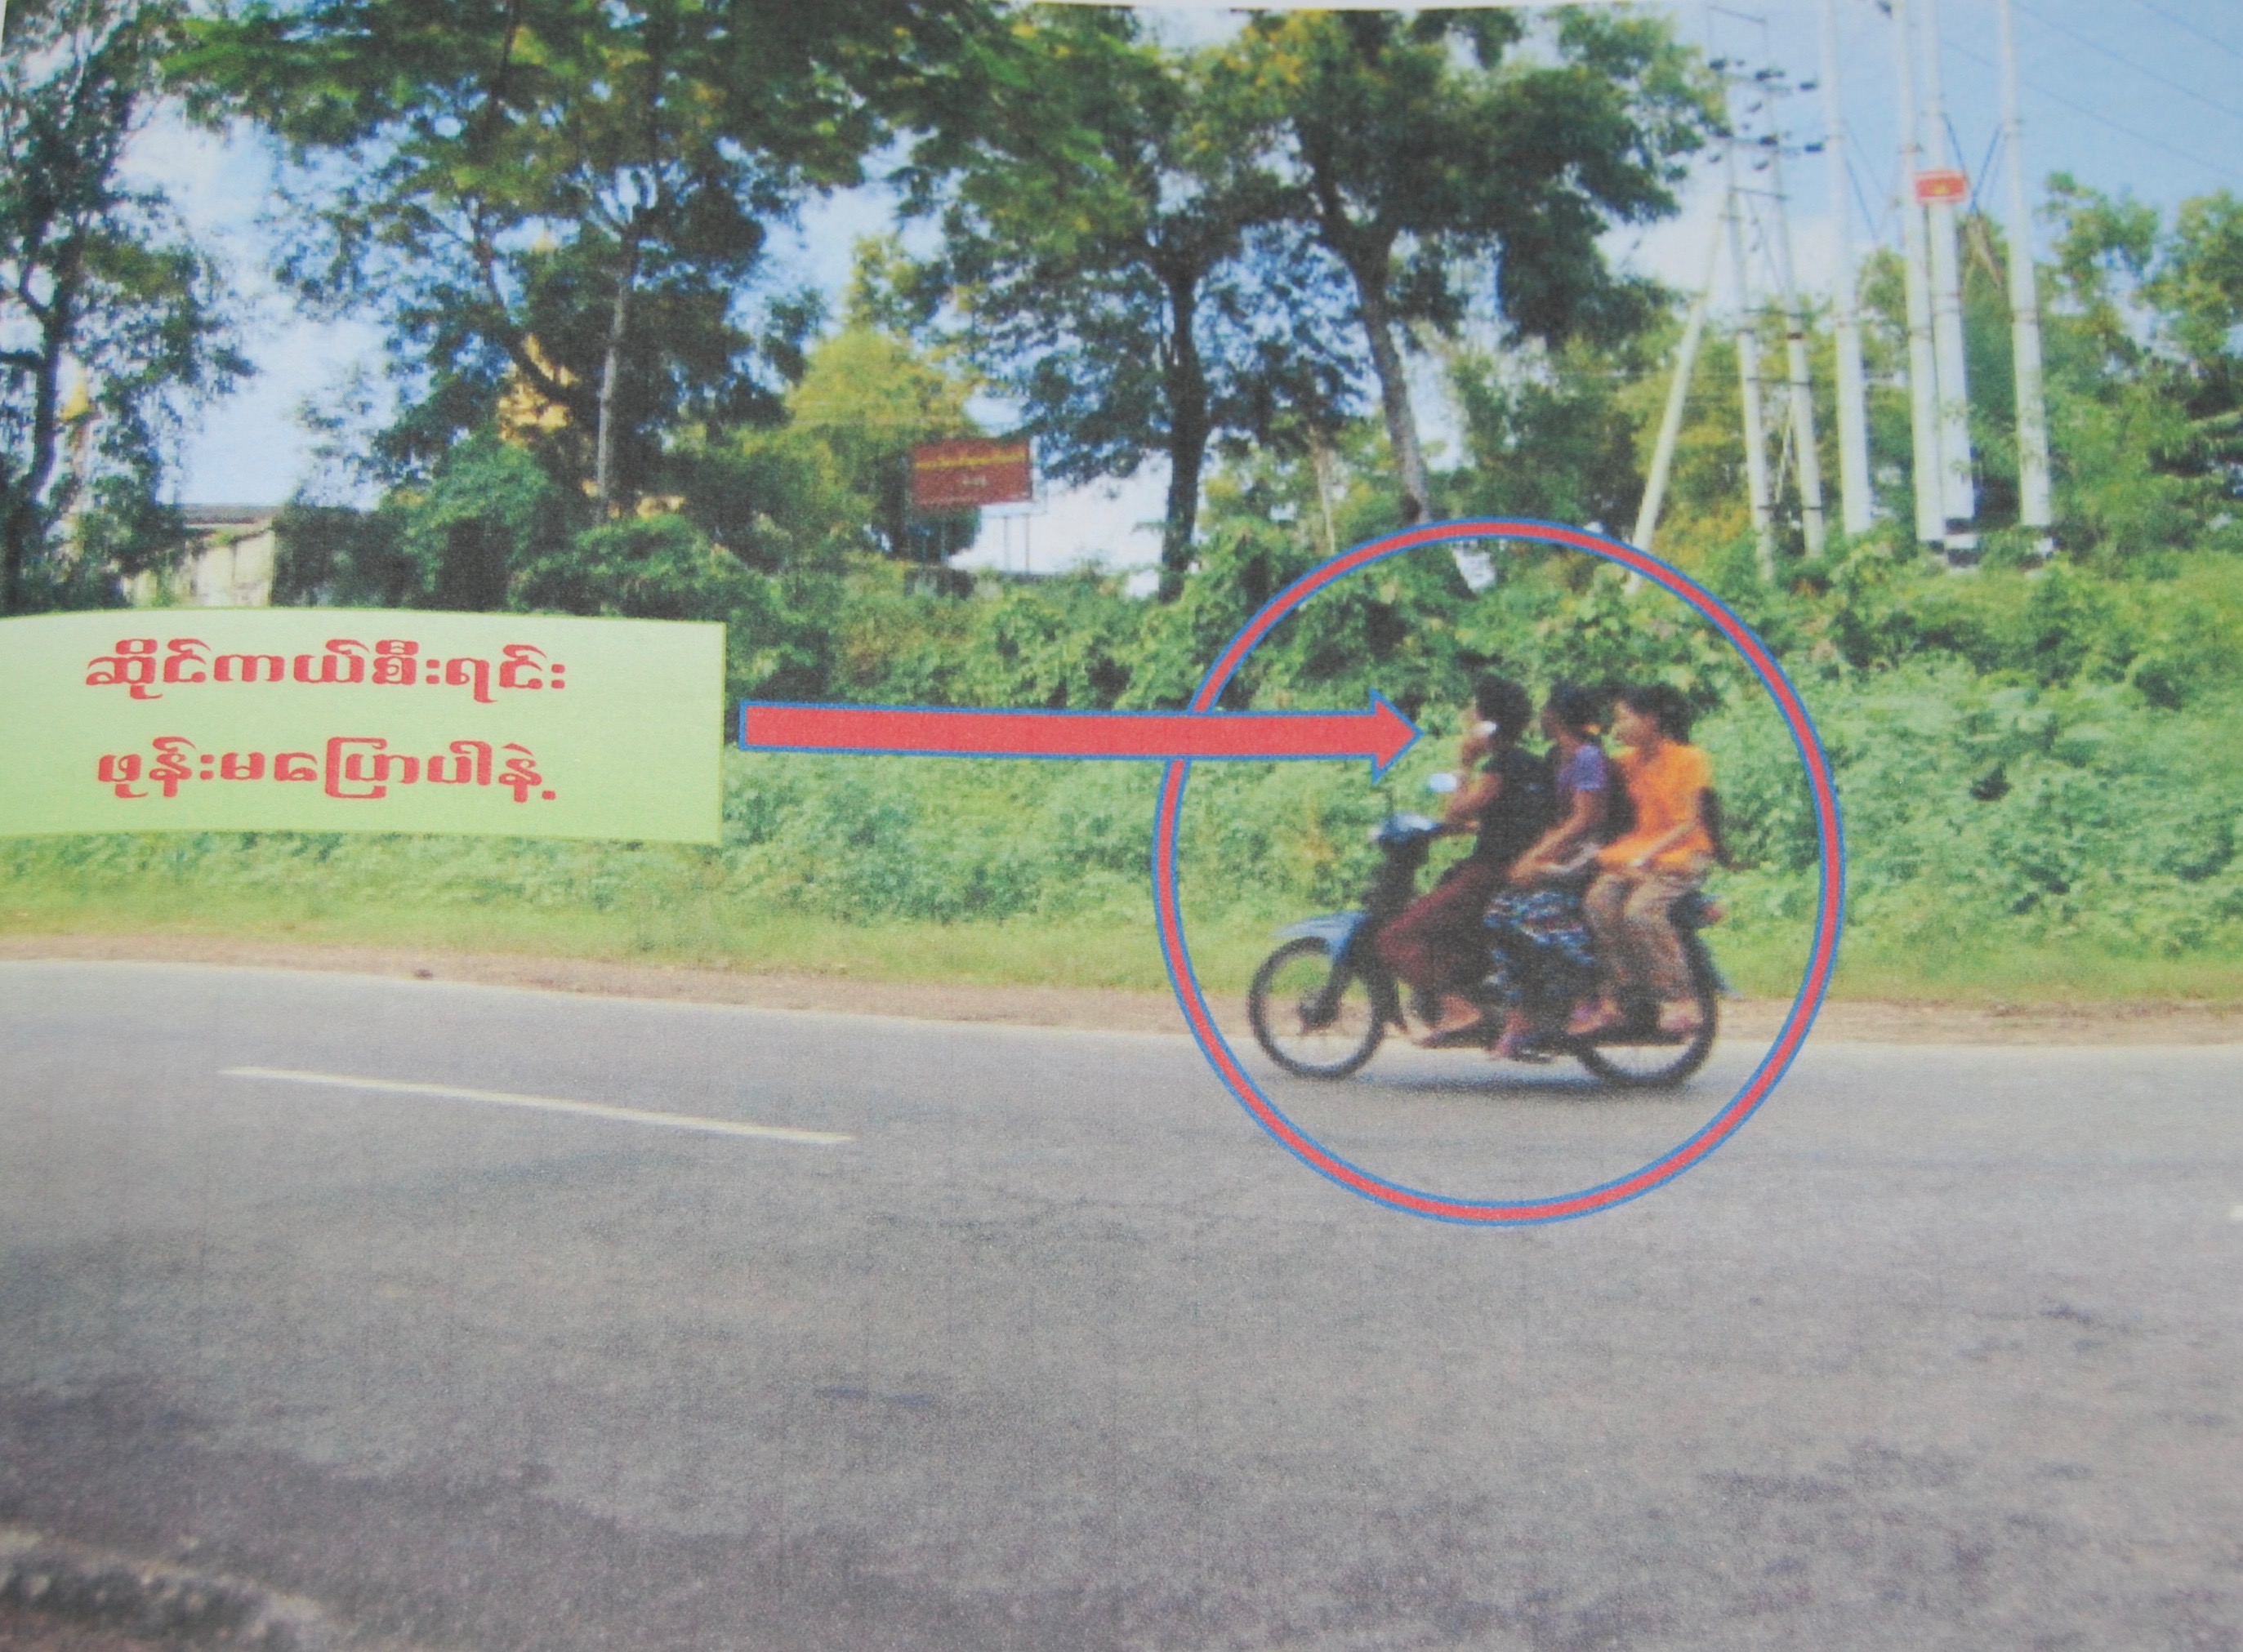 A page from a Yangon Traffic Police rule book. Photo: Jacob Goldberg